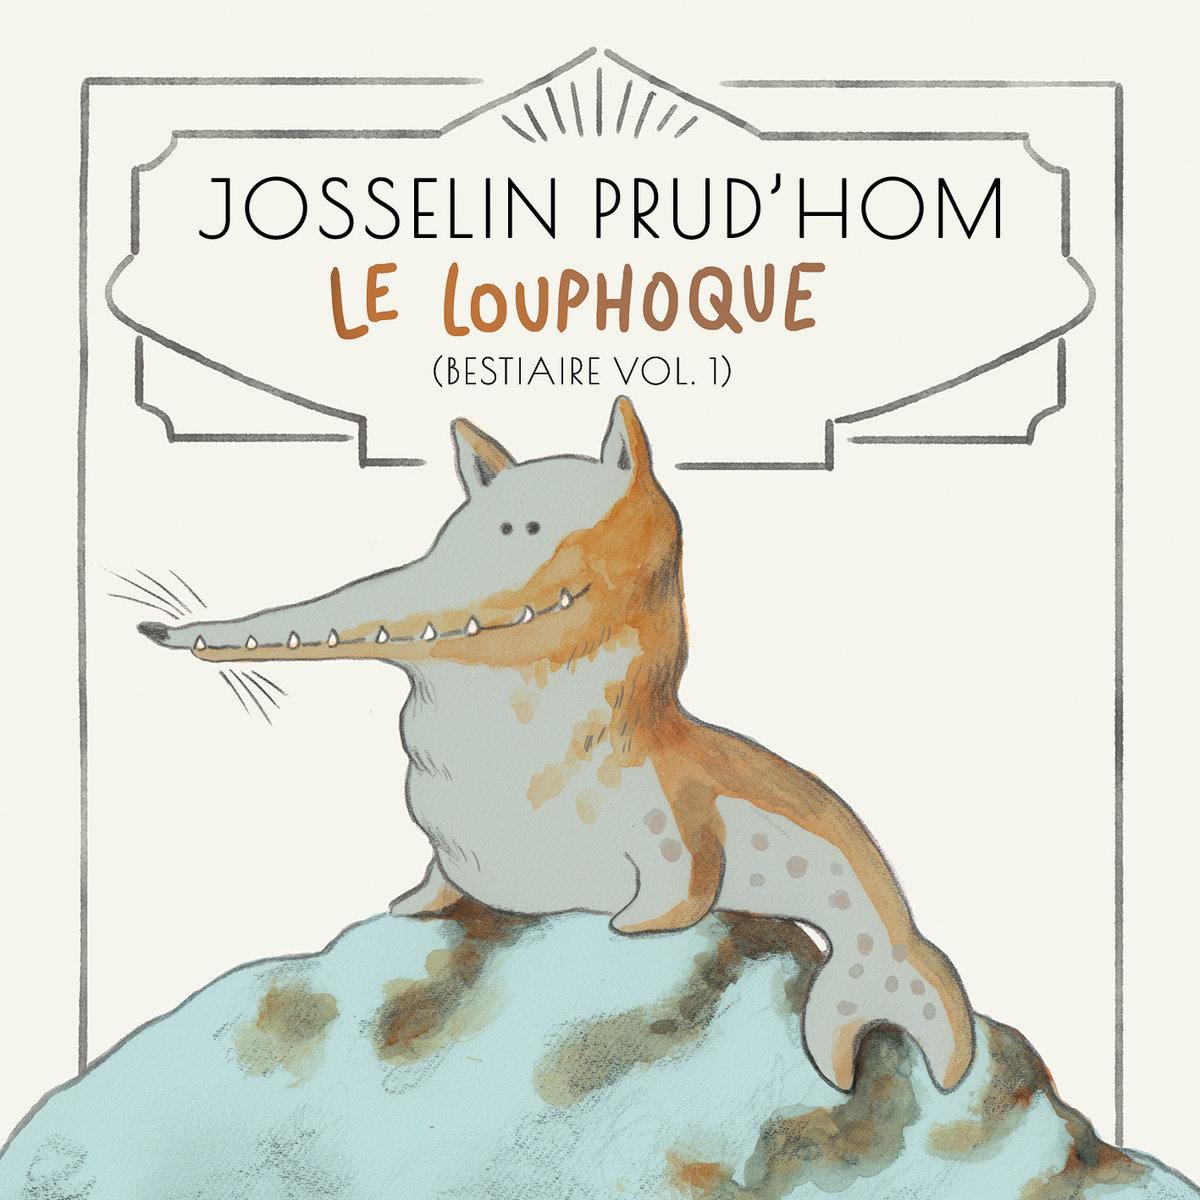 Hand drawn illustration of an imaginary animal. Text above illustration reads "Josselin Prud'hom, Le Louphoque"